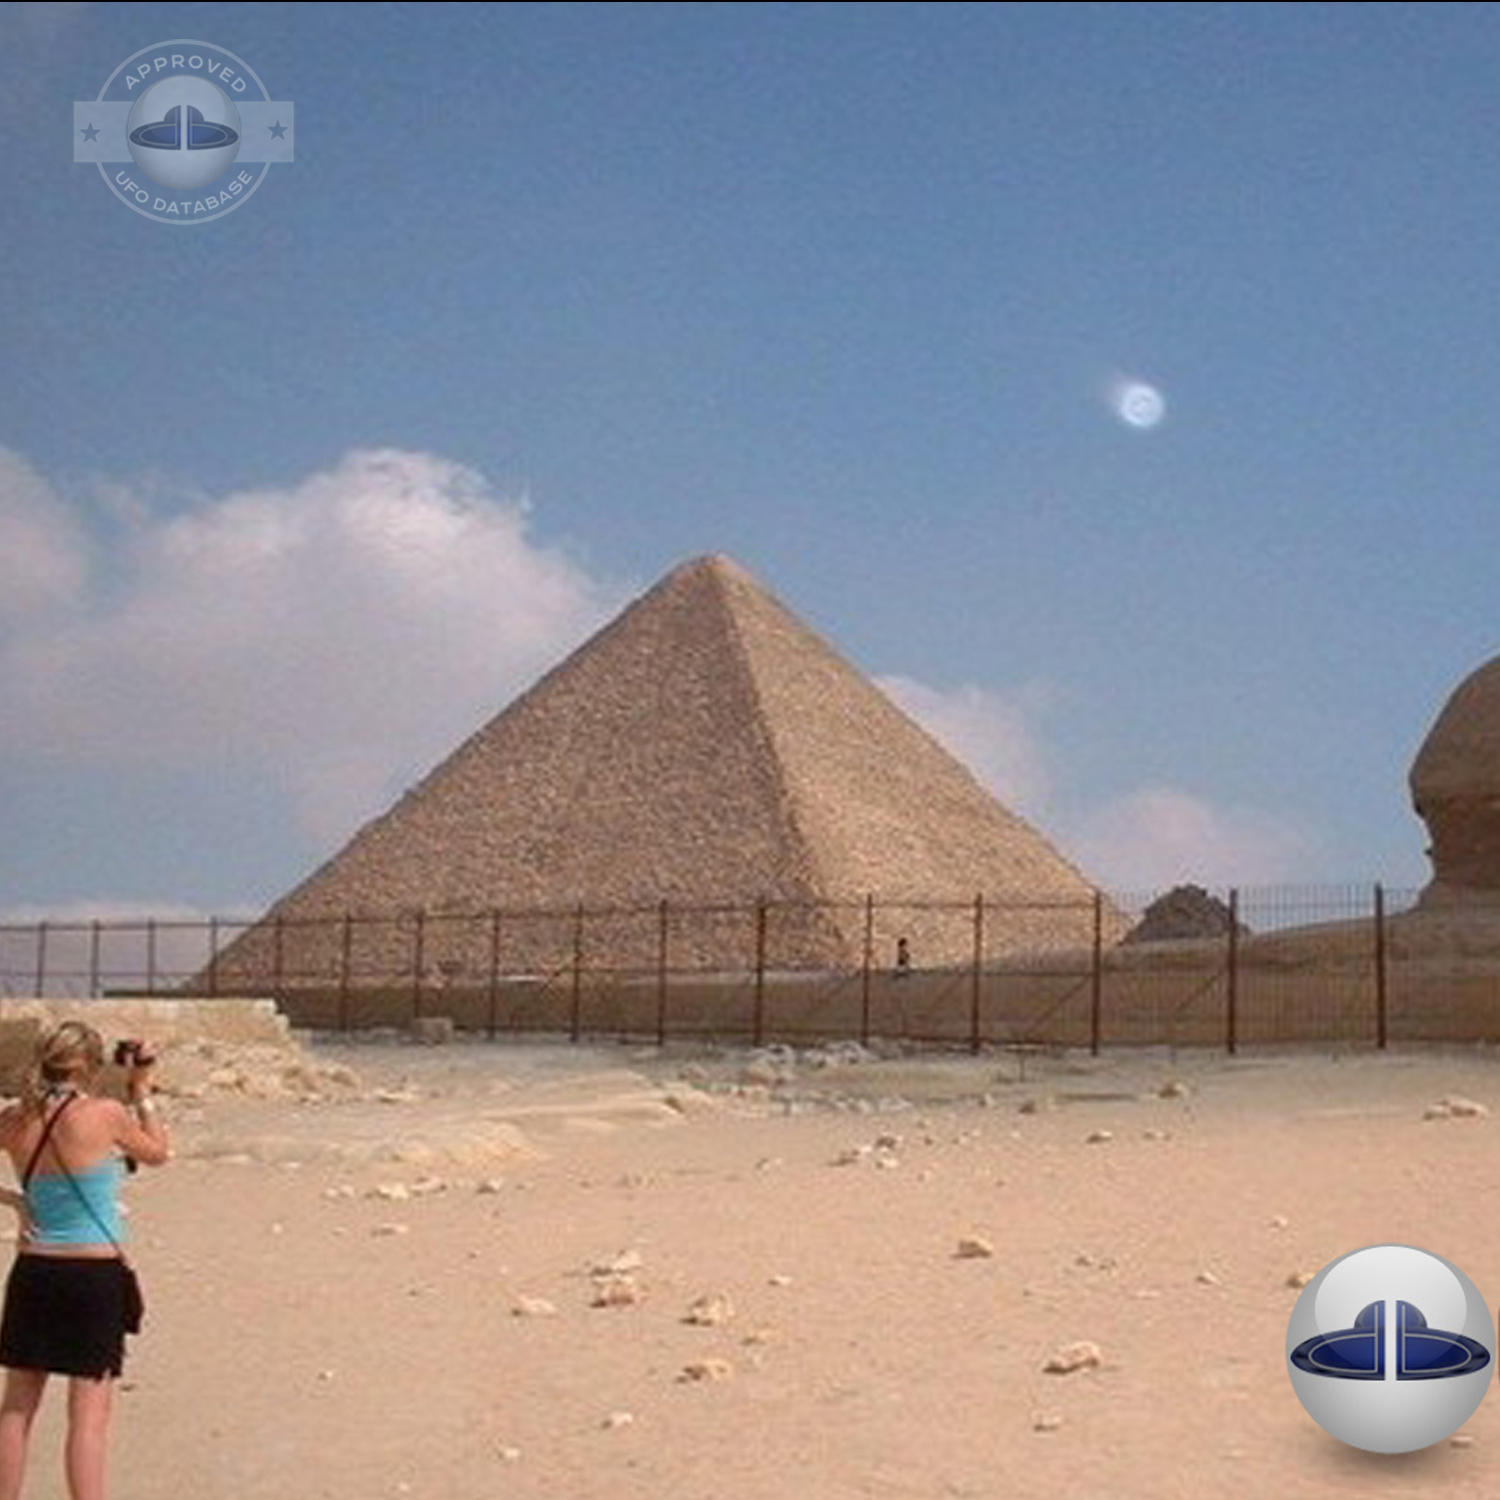 UFO picture near the famous Great Sphinx of Giza by a tourist | Egypt UFO Picture #143-2